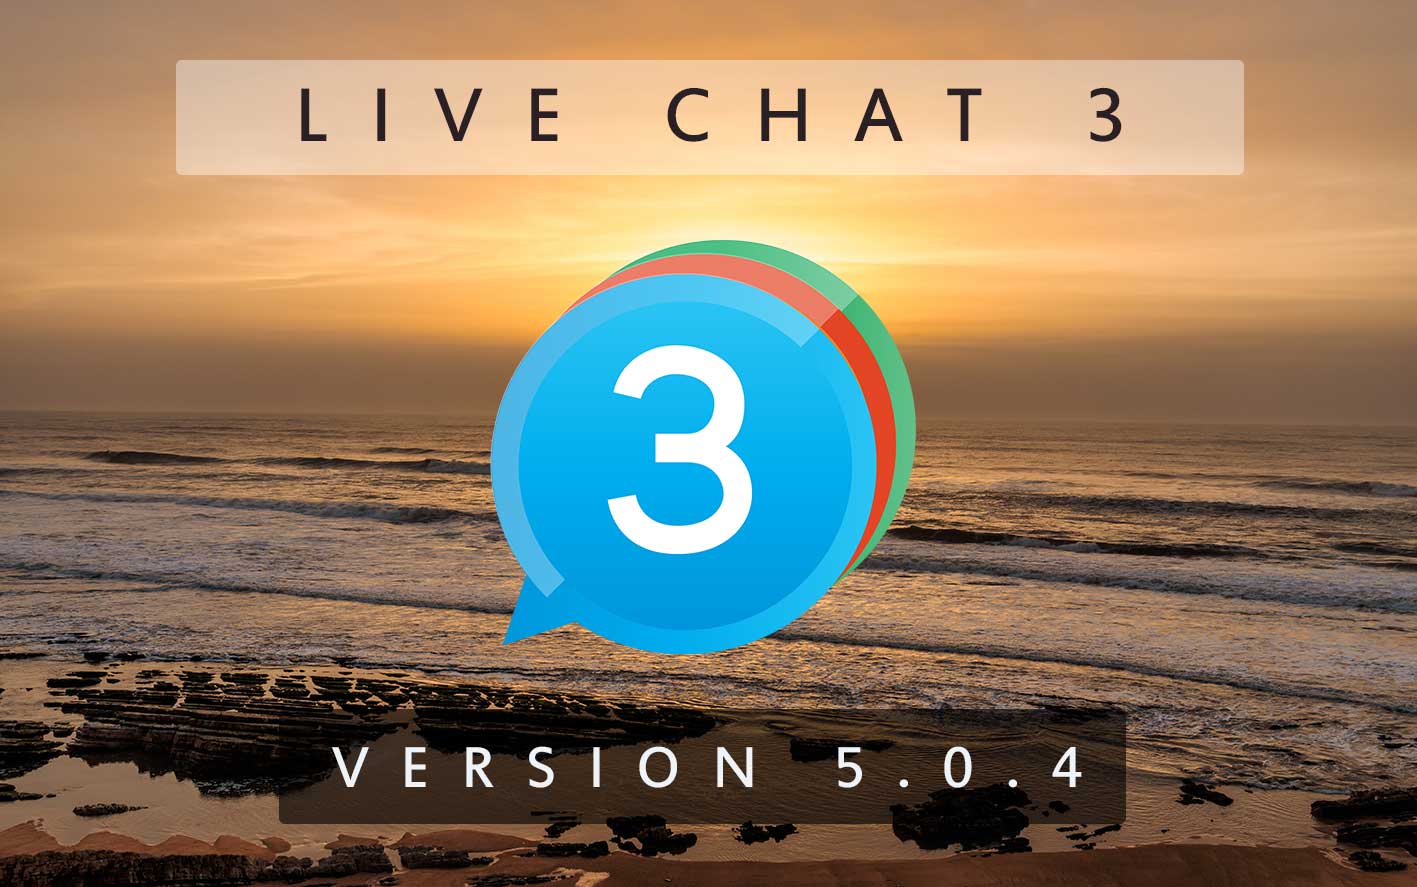 Live Chat 3 - Version 5.0.4